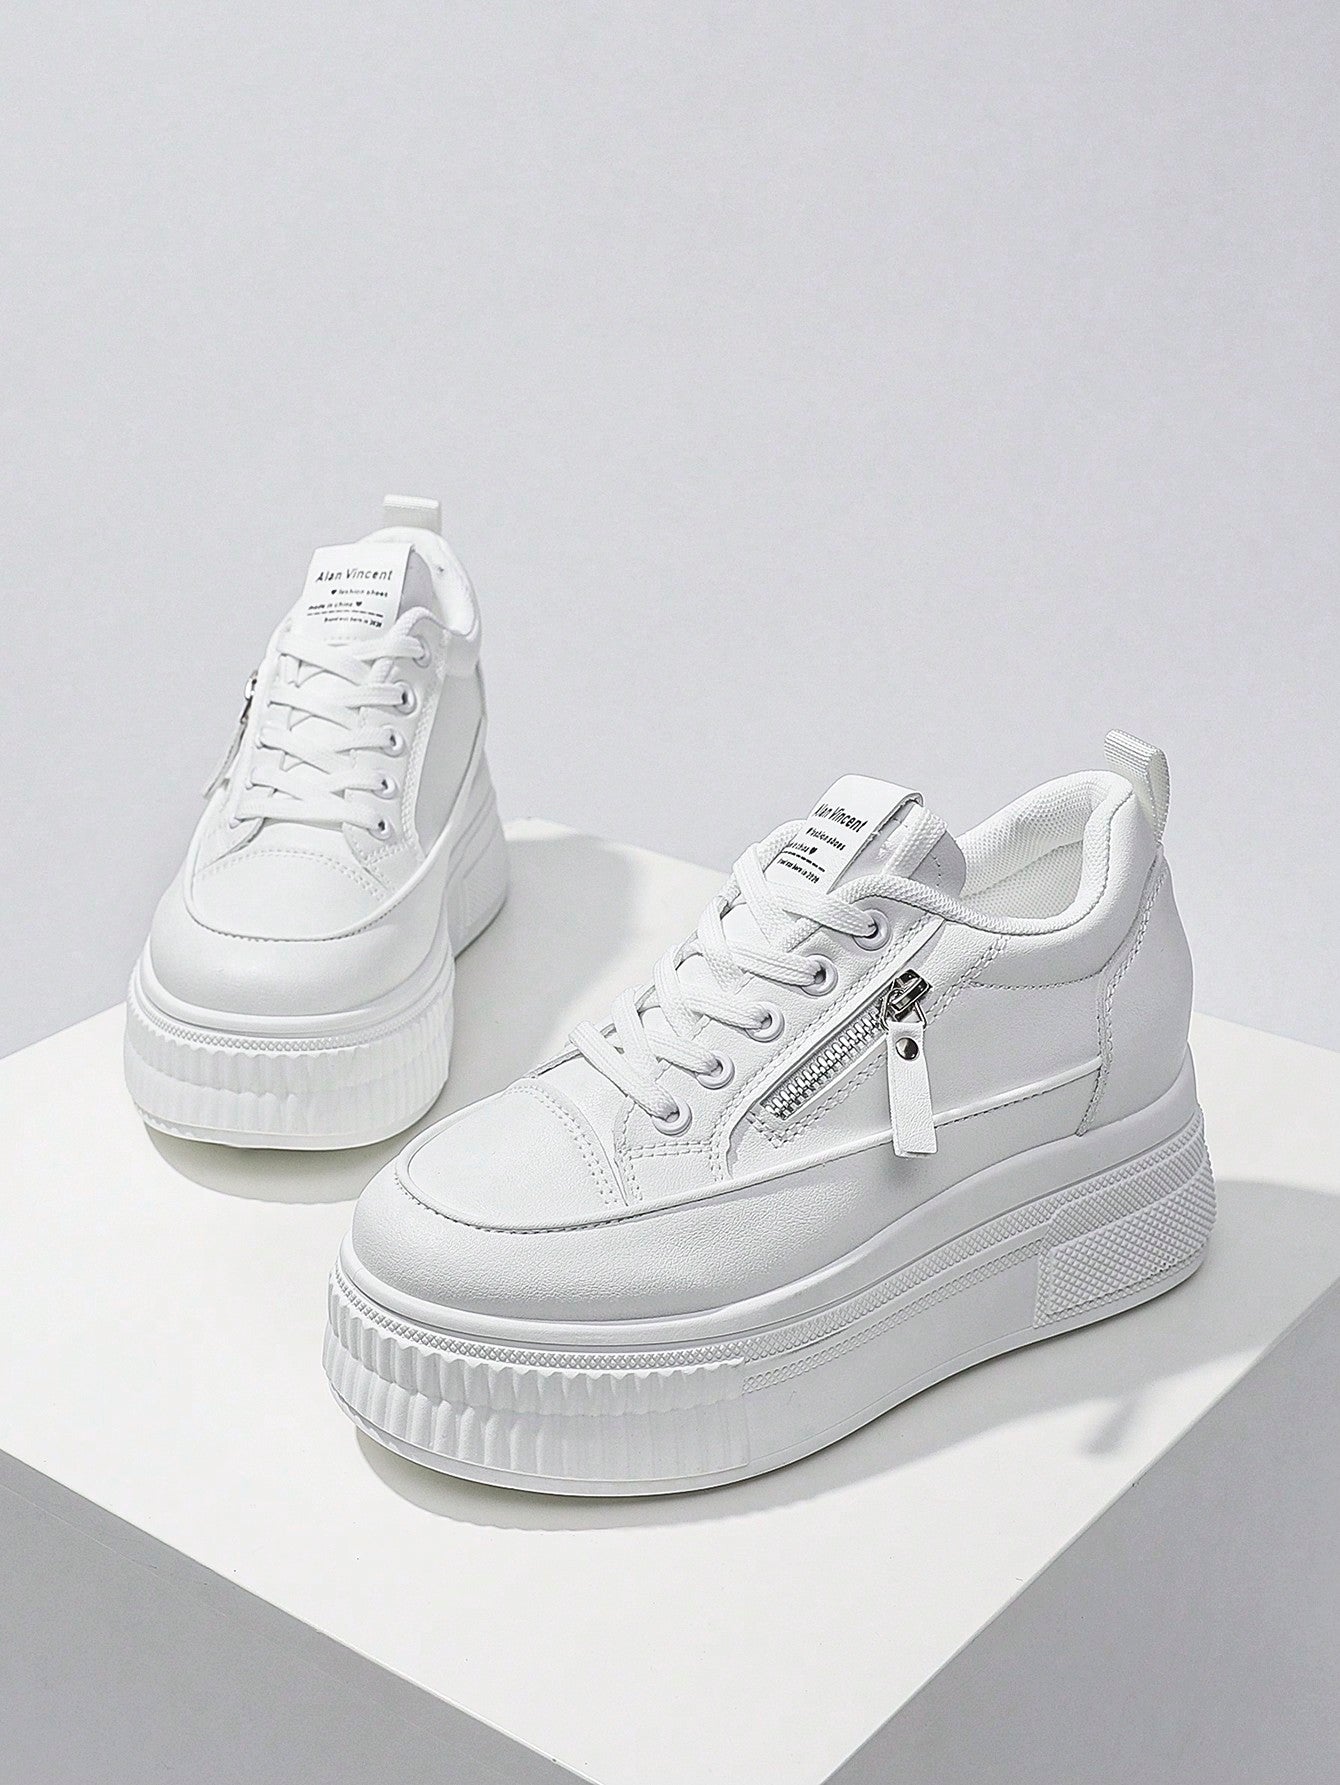 New Style Casual Shoes For Women, Ladies Platform Shoes With  Zipper, White Shoes, Outdoor Comfortable Sneakers, Internal Increase 5cm, Party Shoes, Suitable For Short Women-White-3